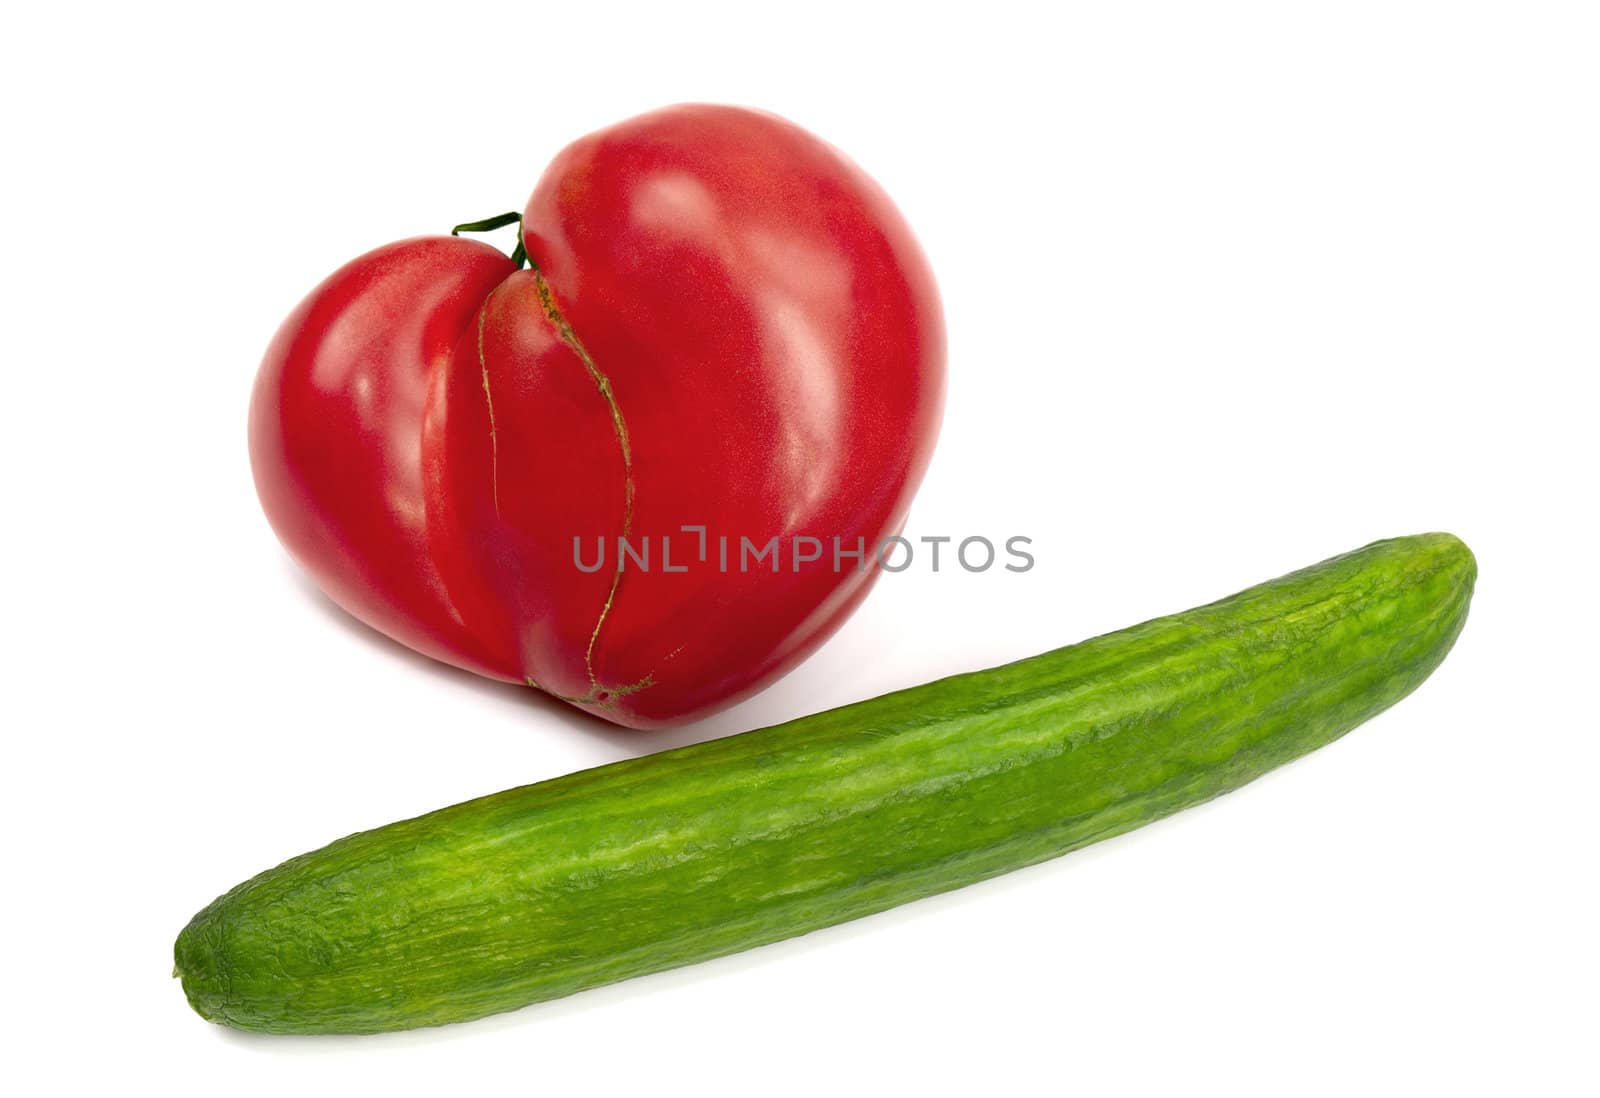 A giant heart-shaped tomato and longest cucumber by Kamensky